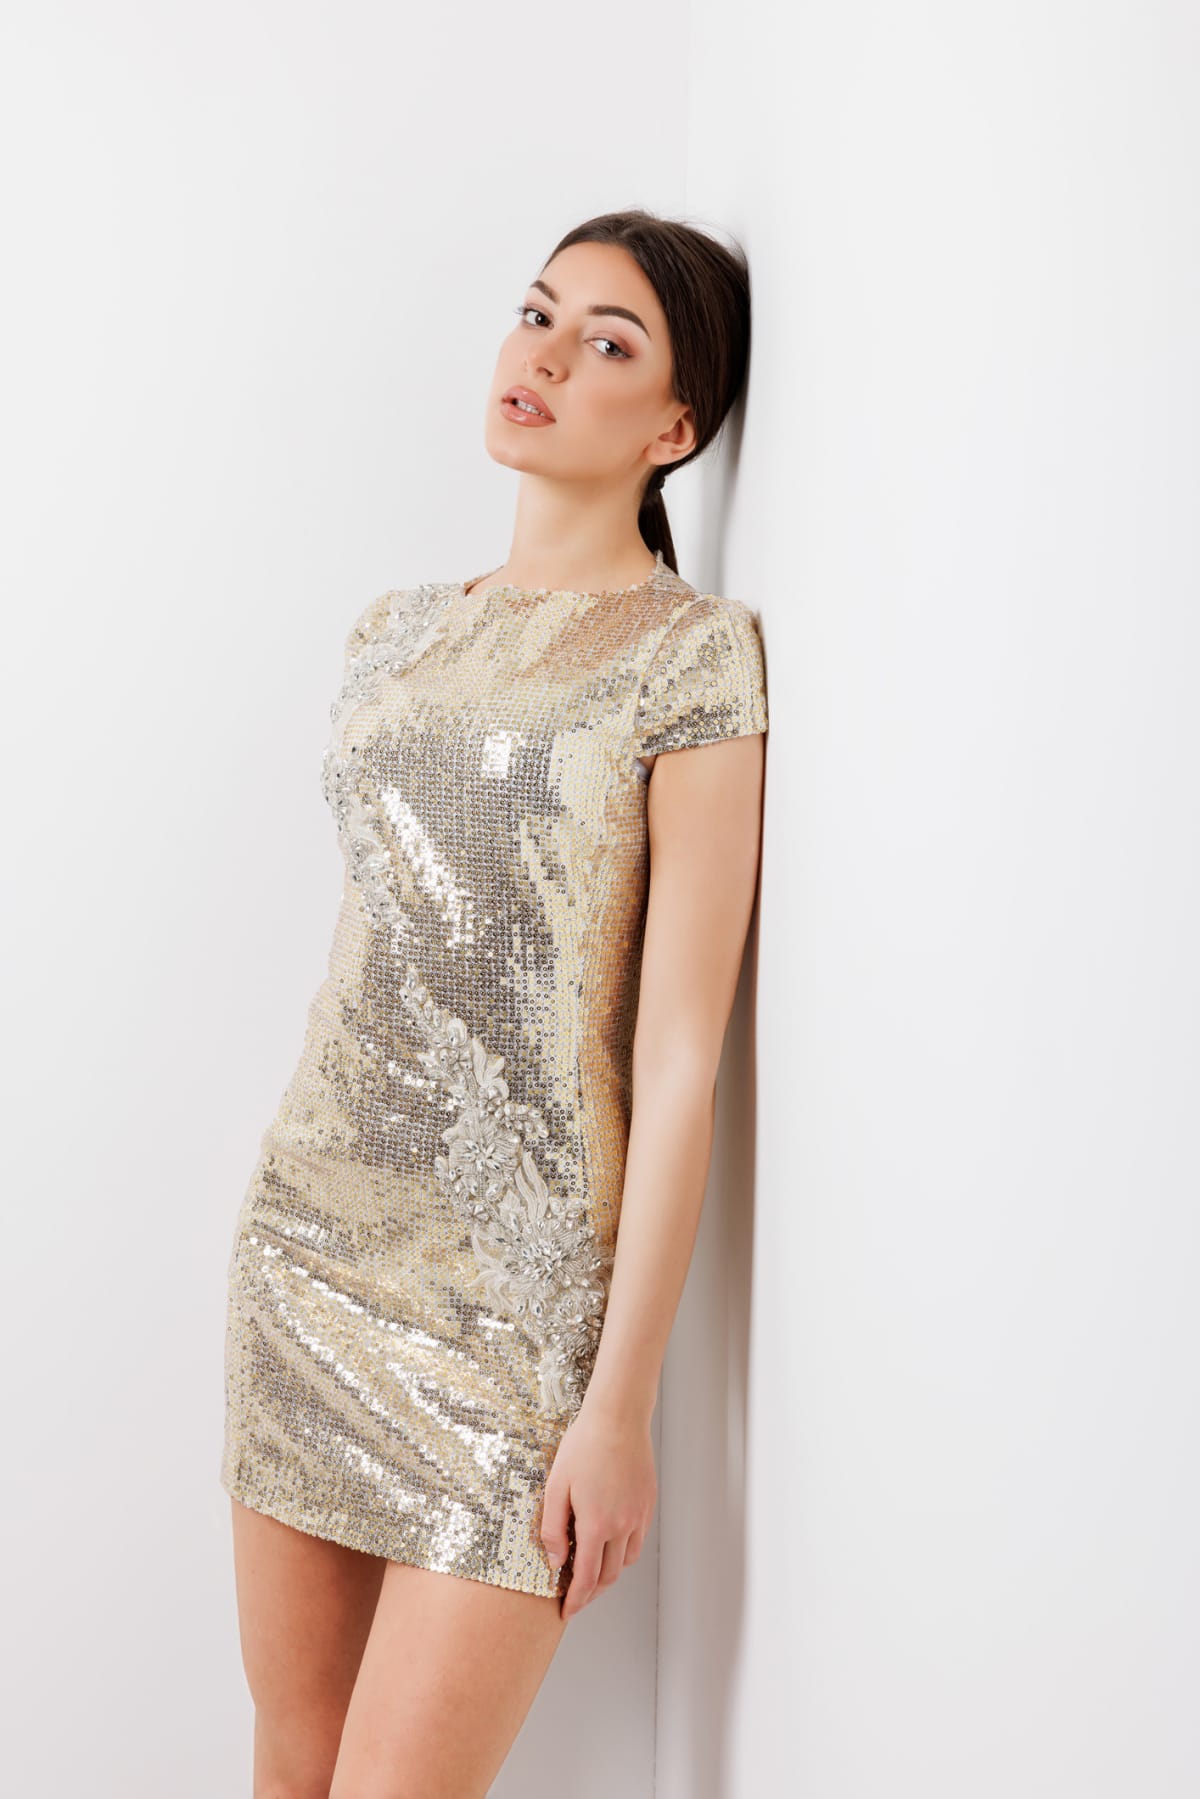 Model wearing glittering golden mini dress leaning on the wall and looking at camera